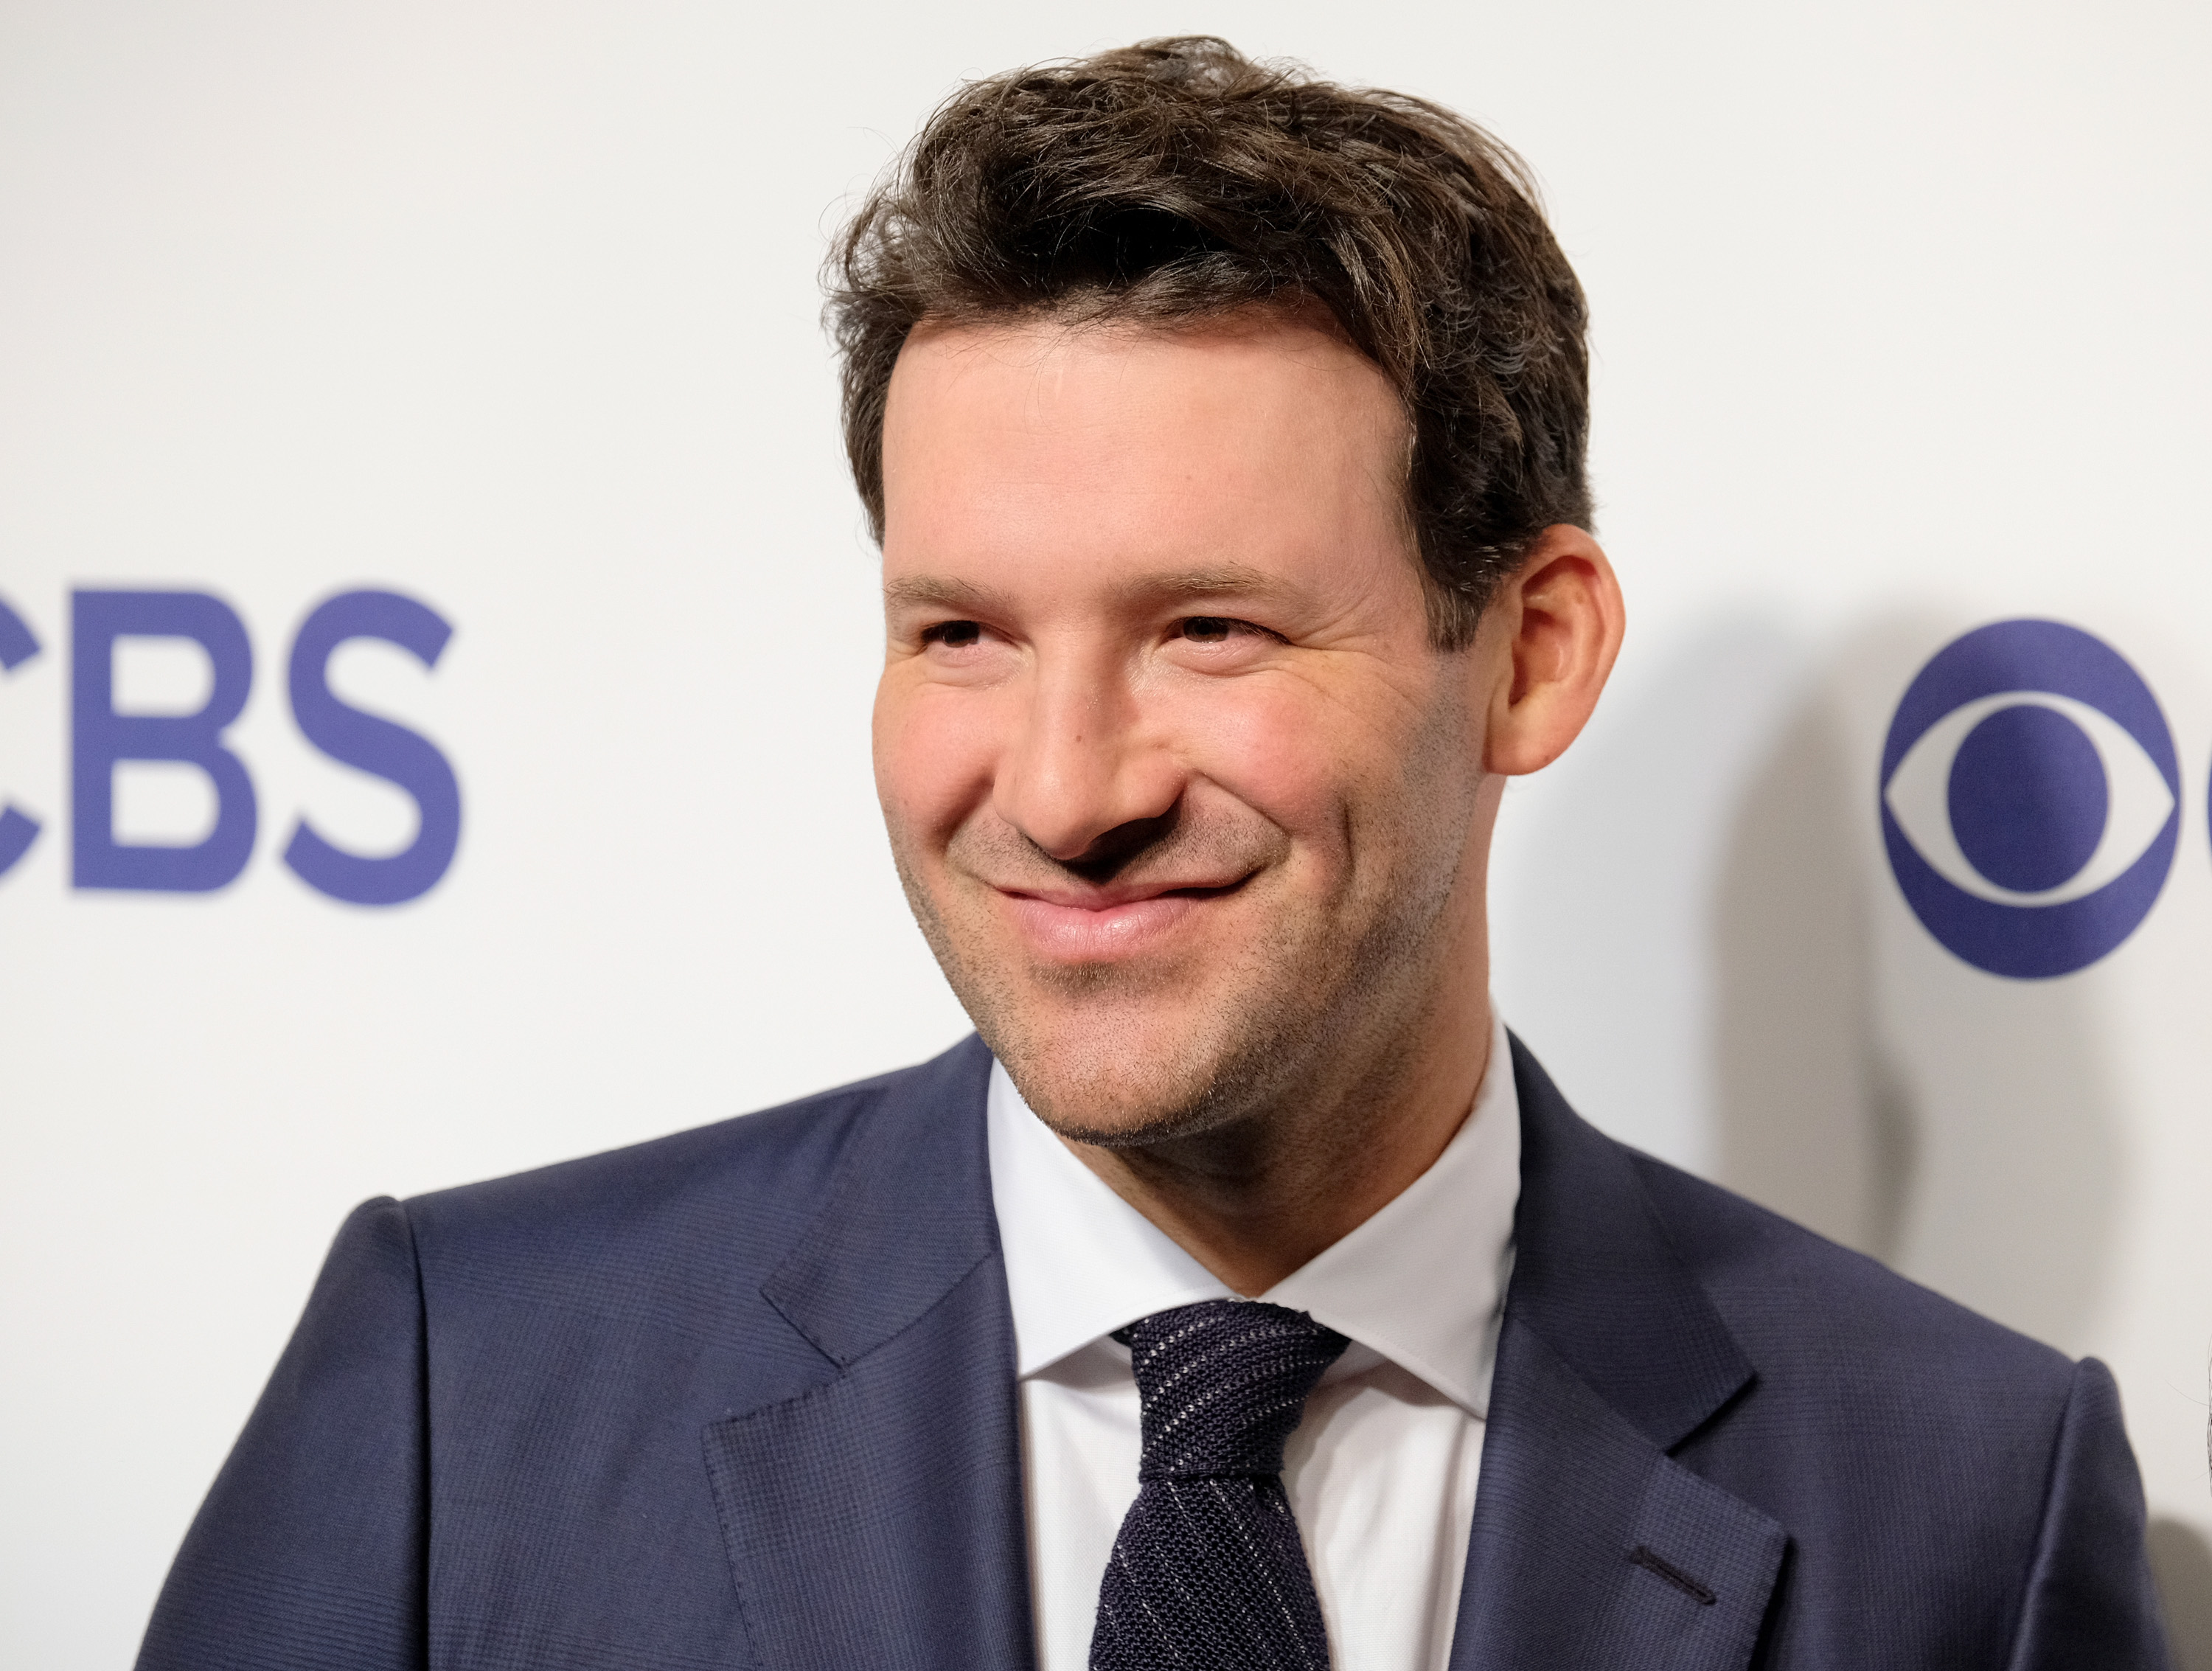 Tony Romo's Annual Salary Request To Stay With CBS Has Been Reported